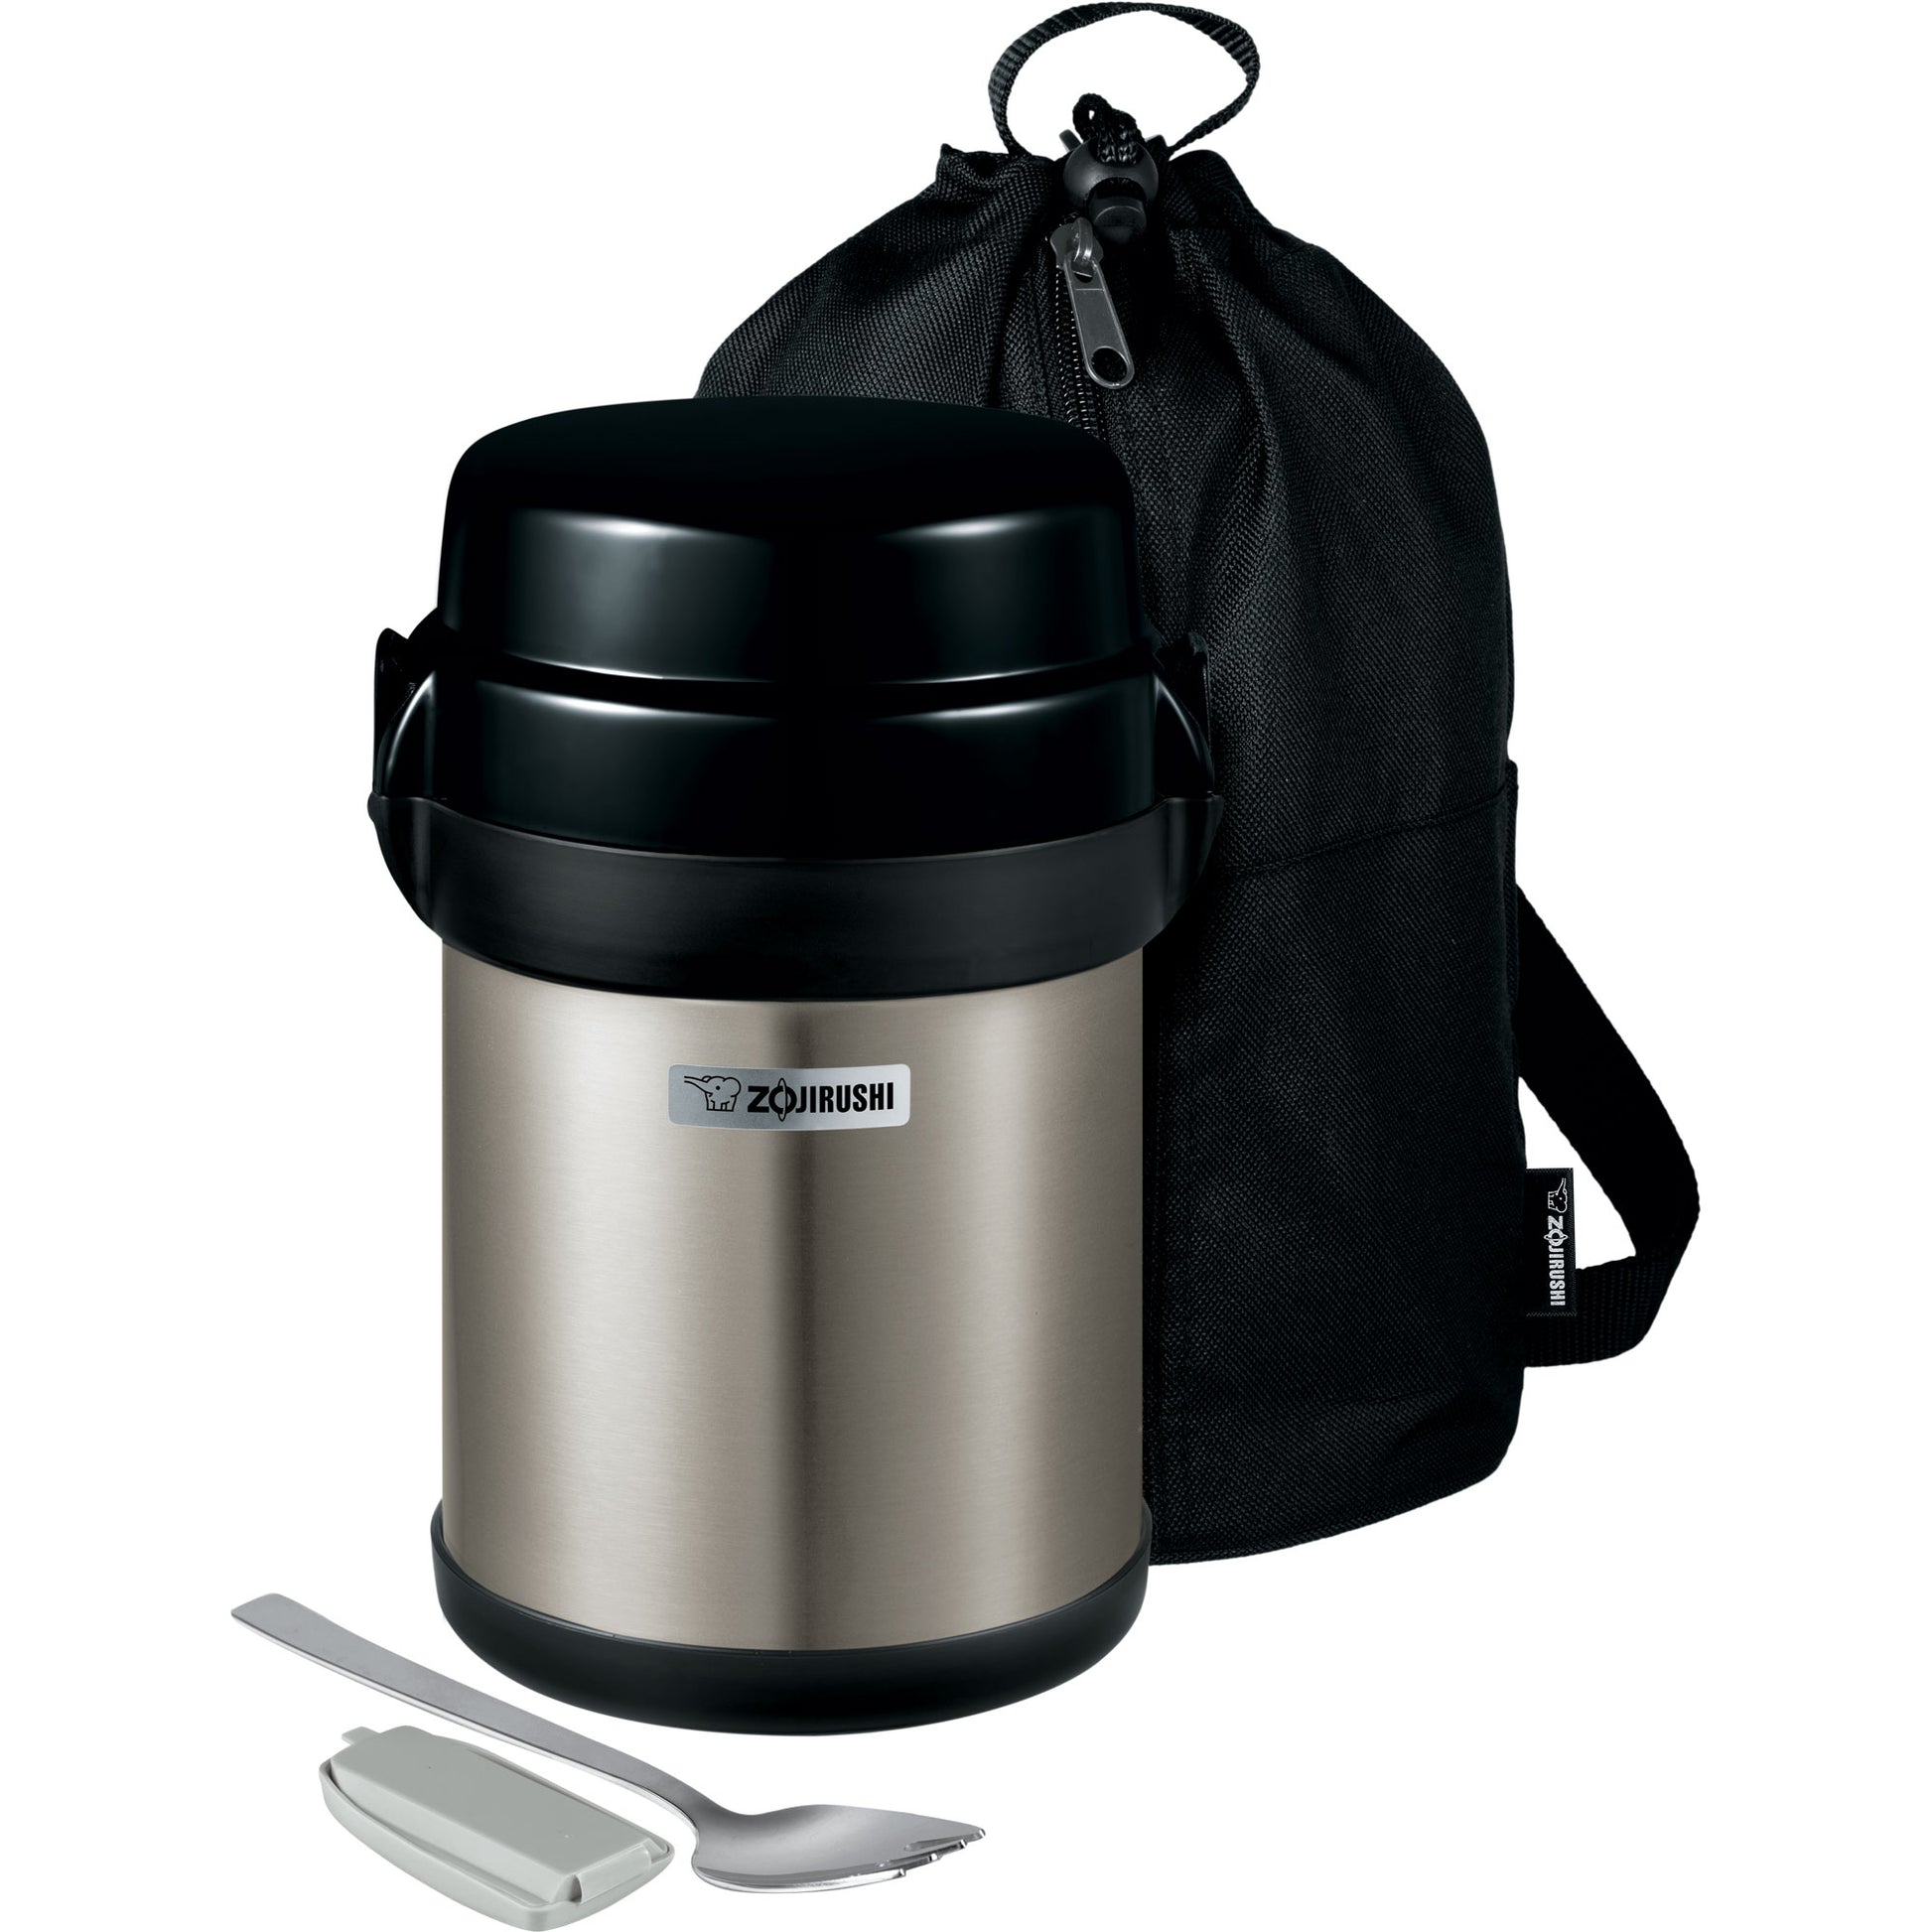 Portable 18/8 Stainless Steel Insulated Lunch Box With Bag & Spoon